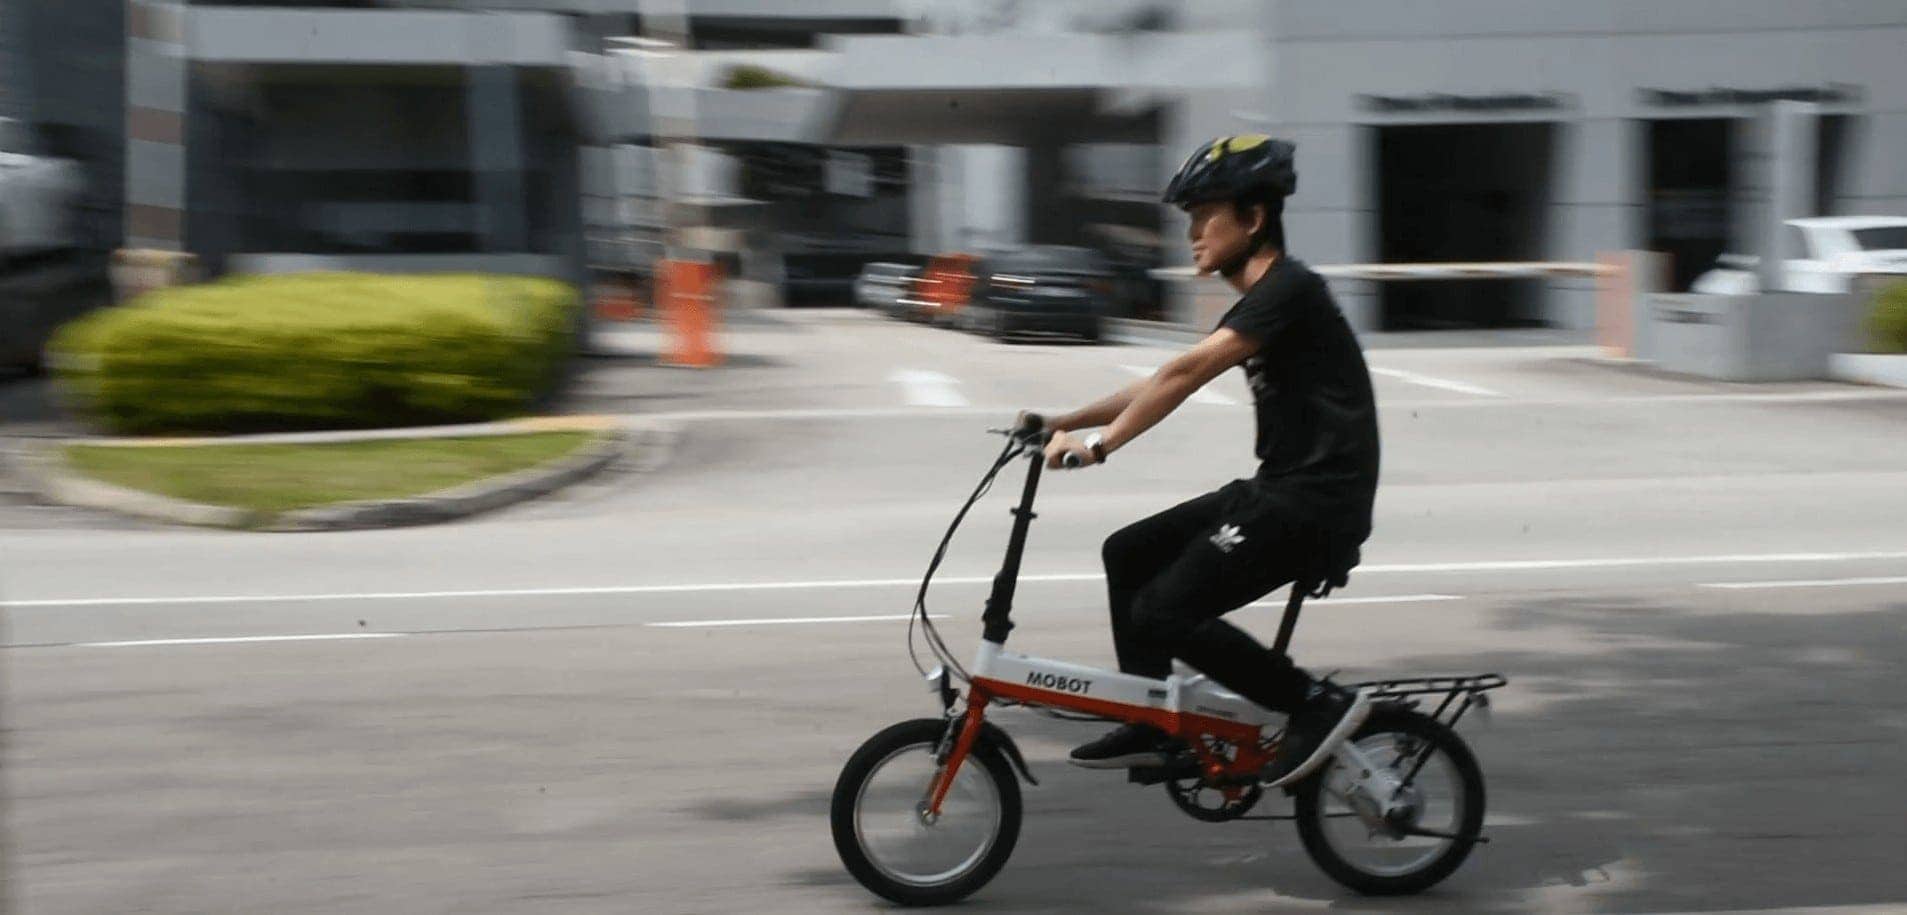 MOBOT MINI 16 RED8AH LTA approved ebike on the road - Installment plans for ebike with affortable monthly repayment